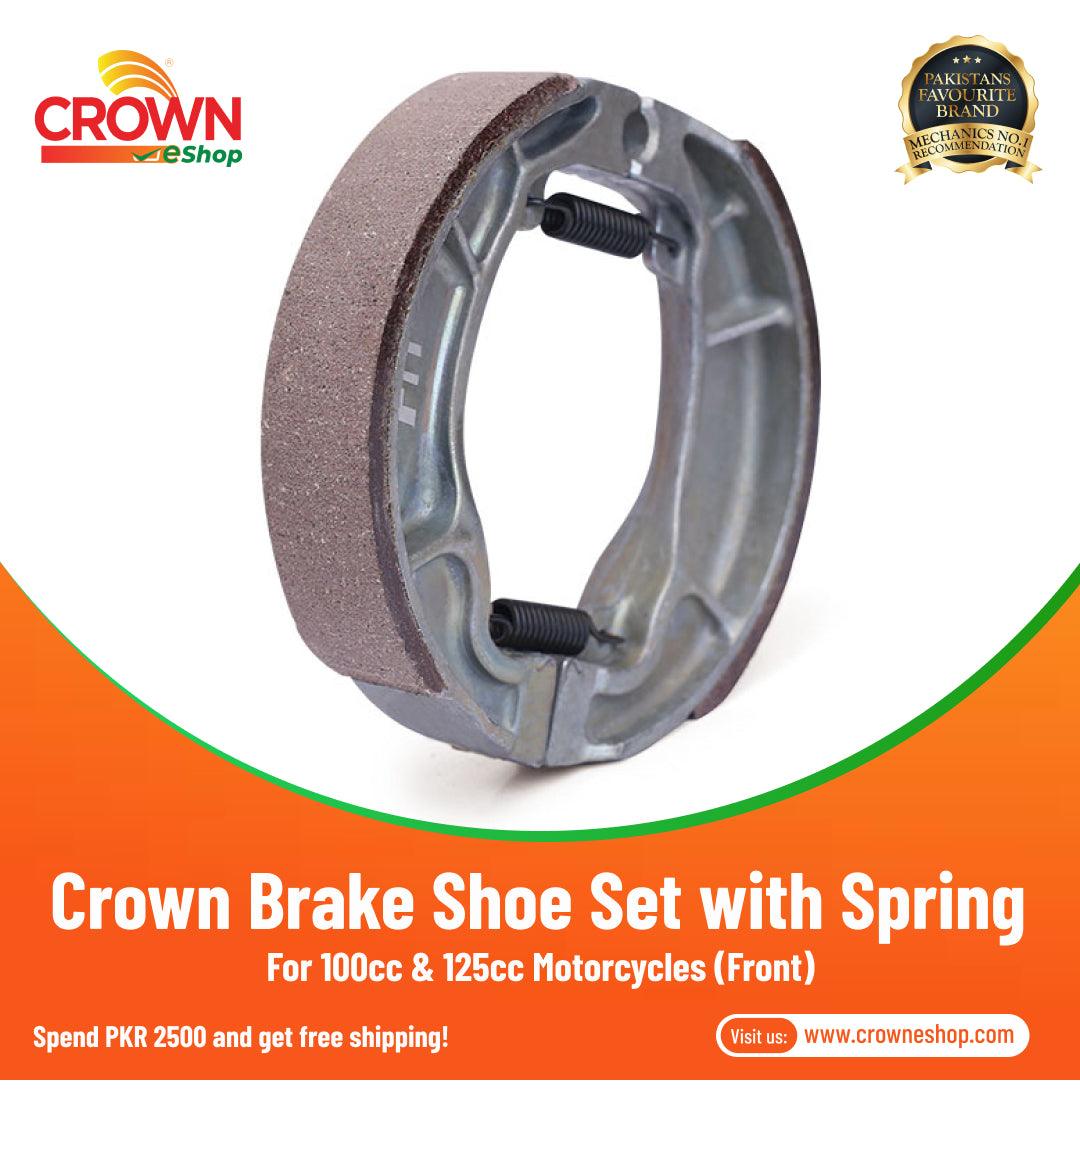 Crown Brake Shoe Set Front with Spring for 100cc & 125cc Motorcycles - Crowneshop